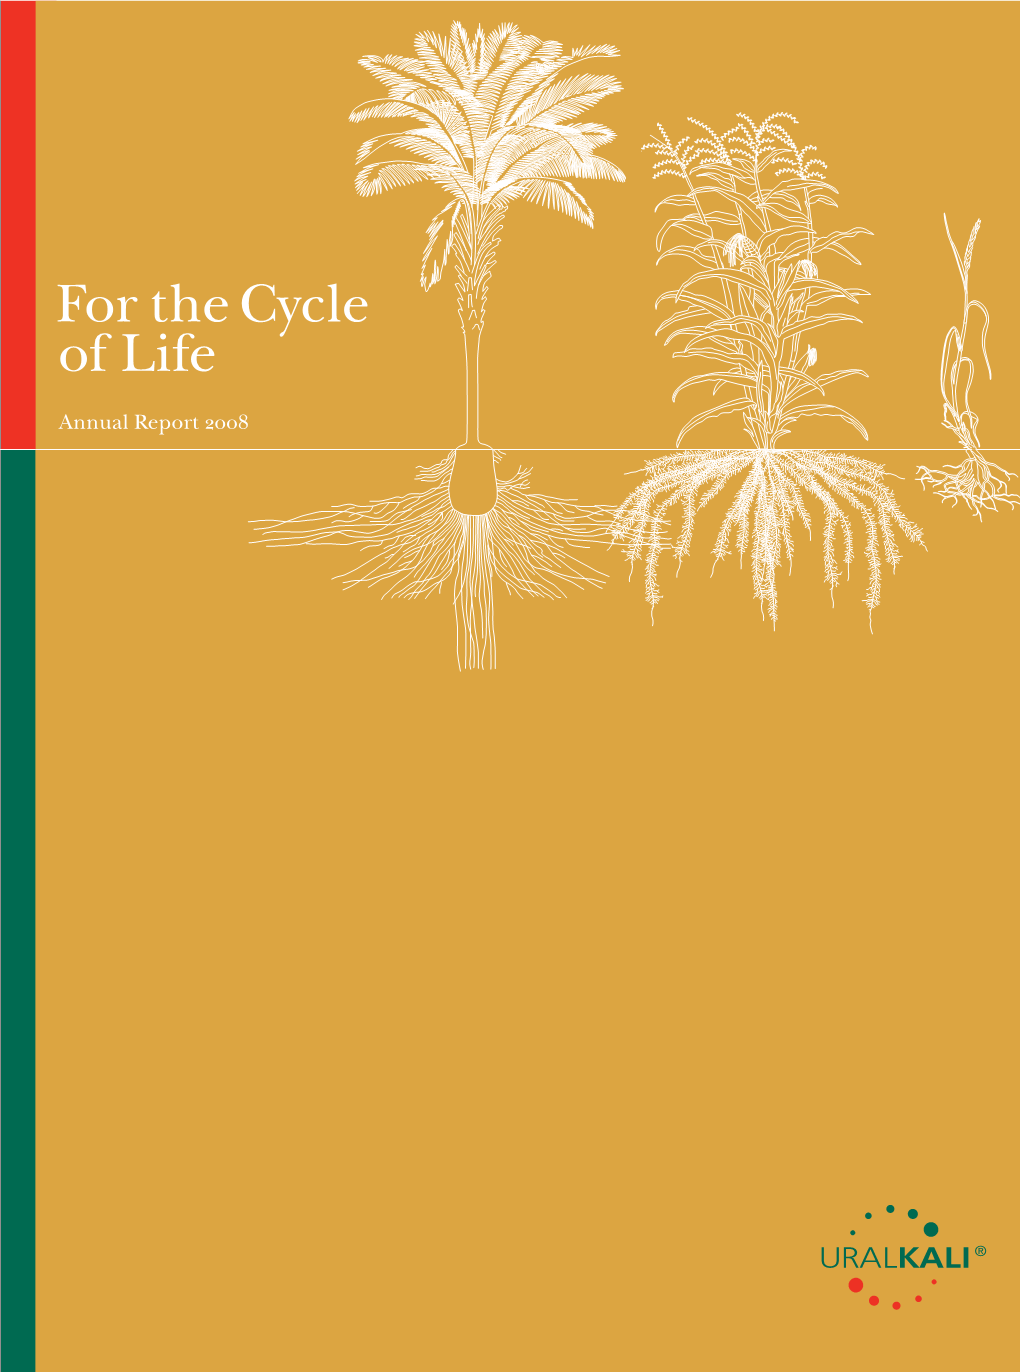 Annual Report 2008 for the Cycle of Life Annual Report 2008